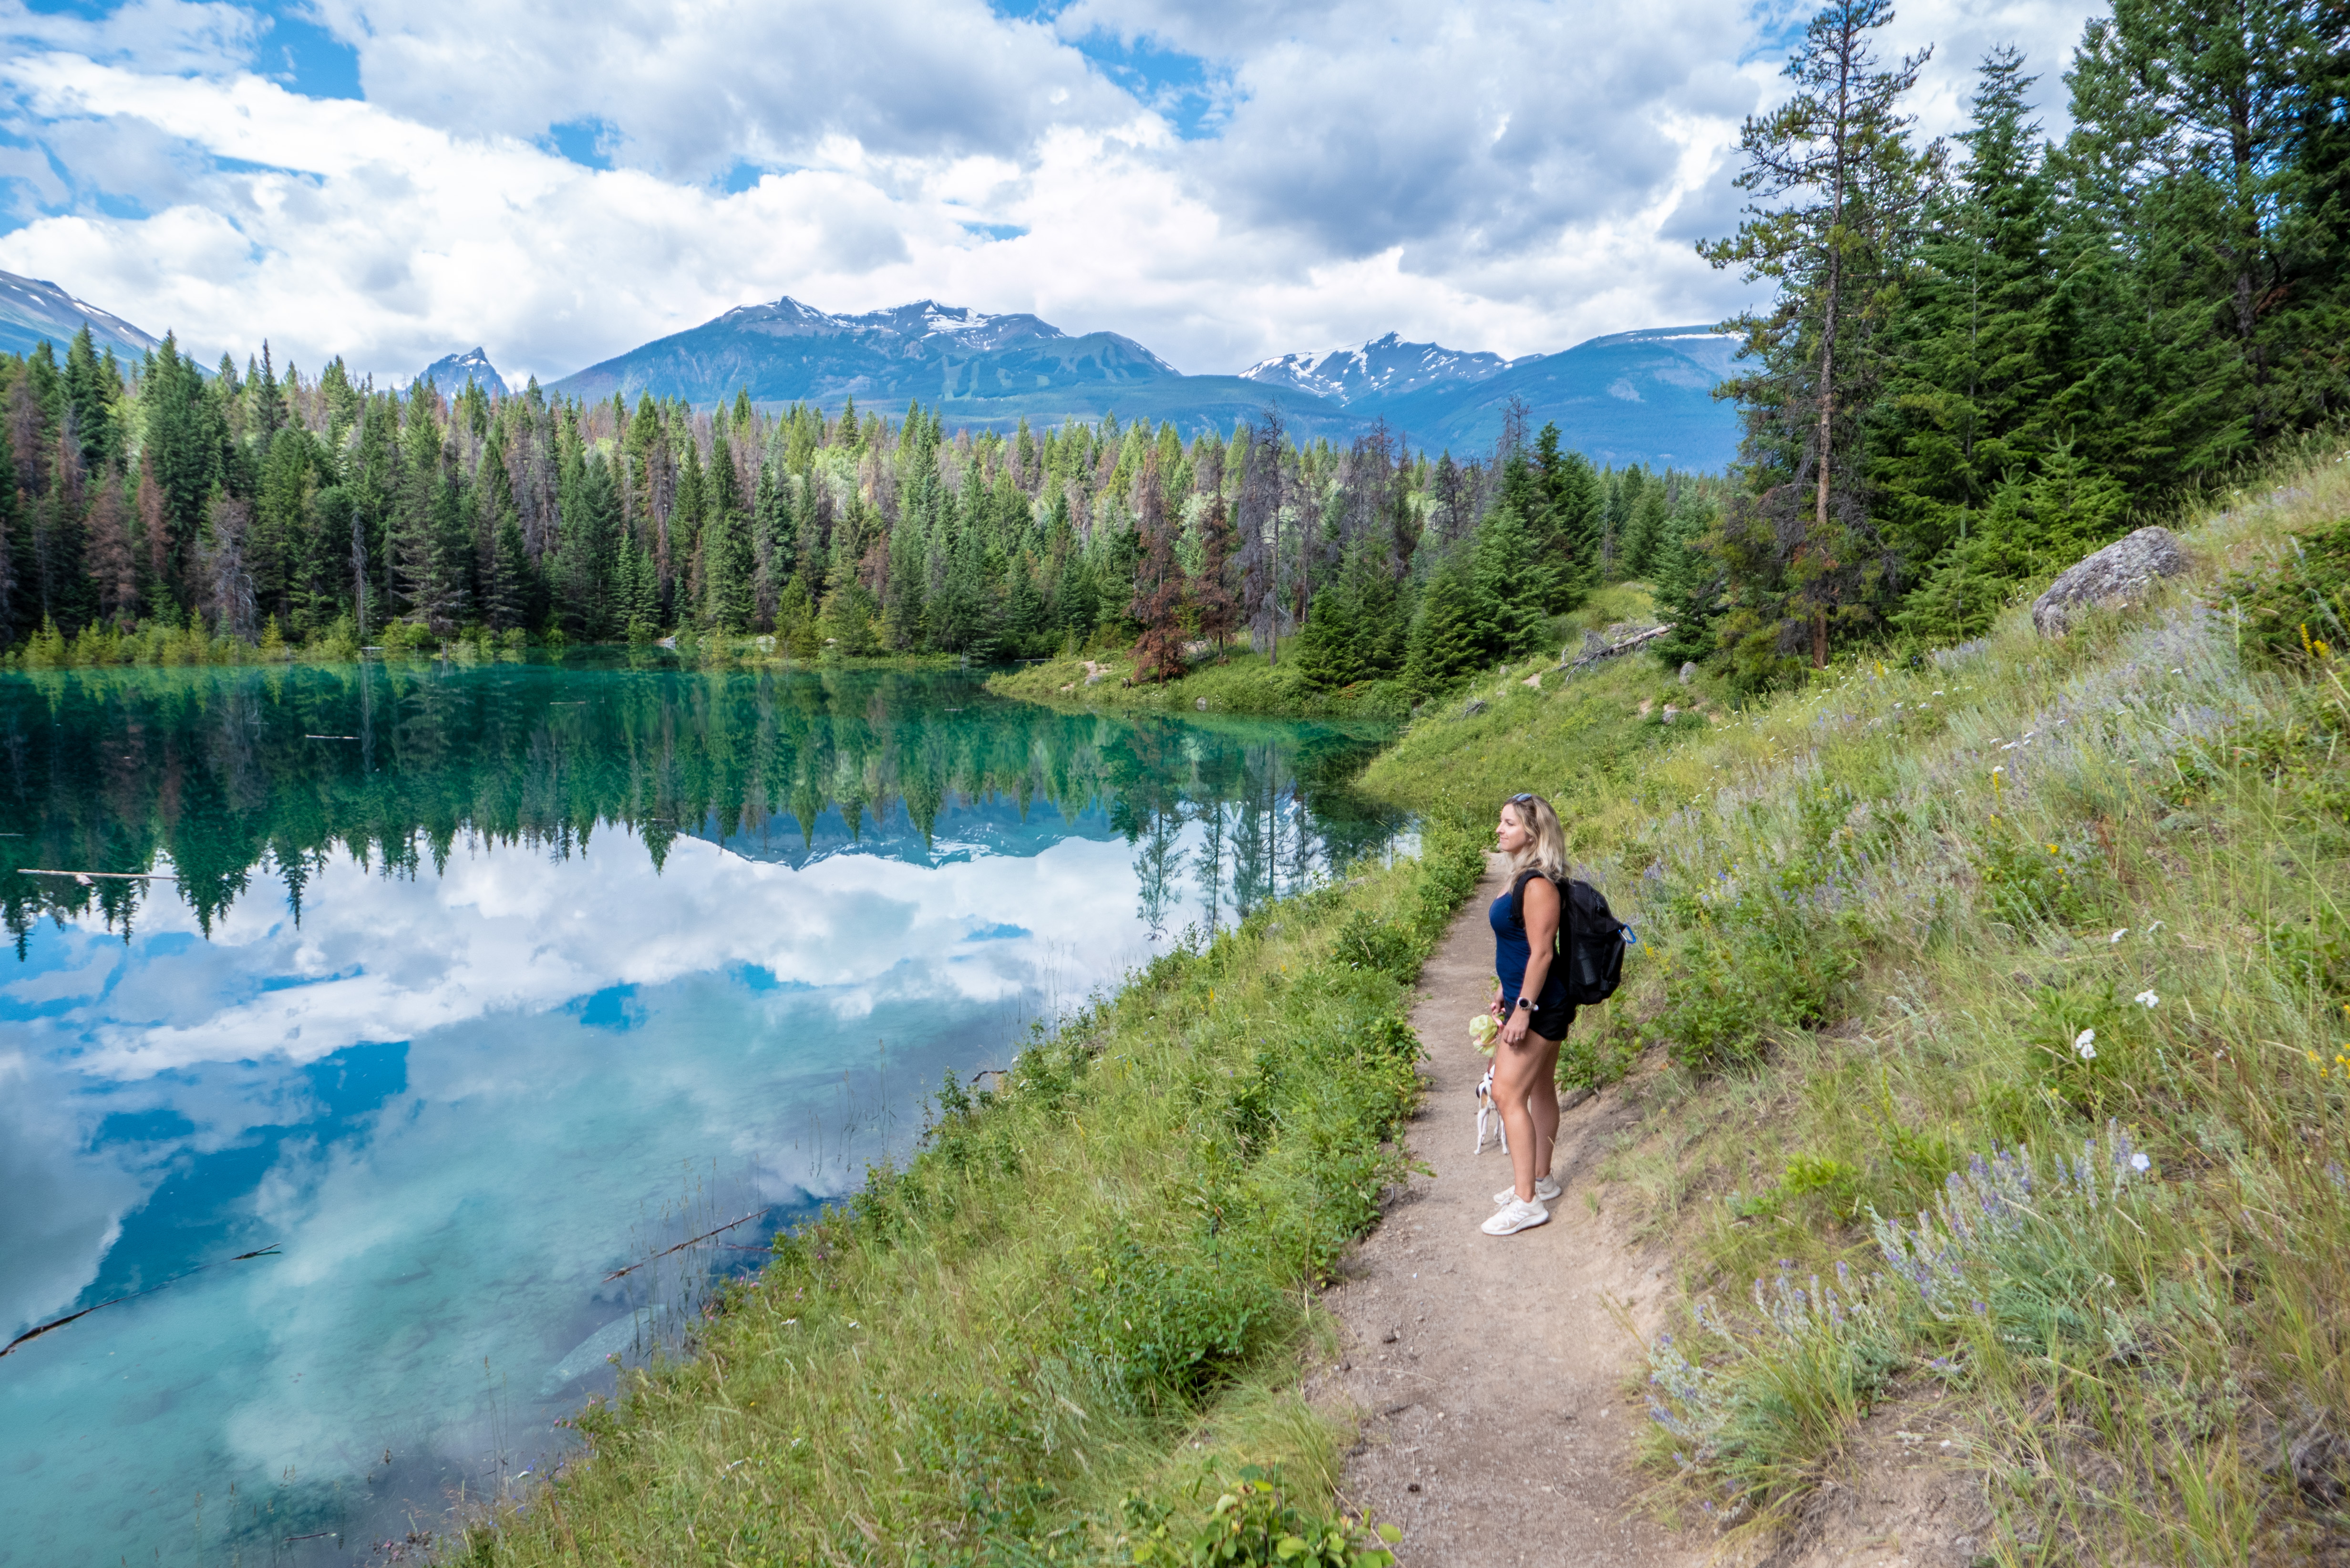 a woman pauses on a trail to look at the turquoise green lake in the alpine forest